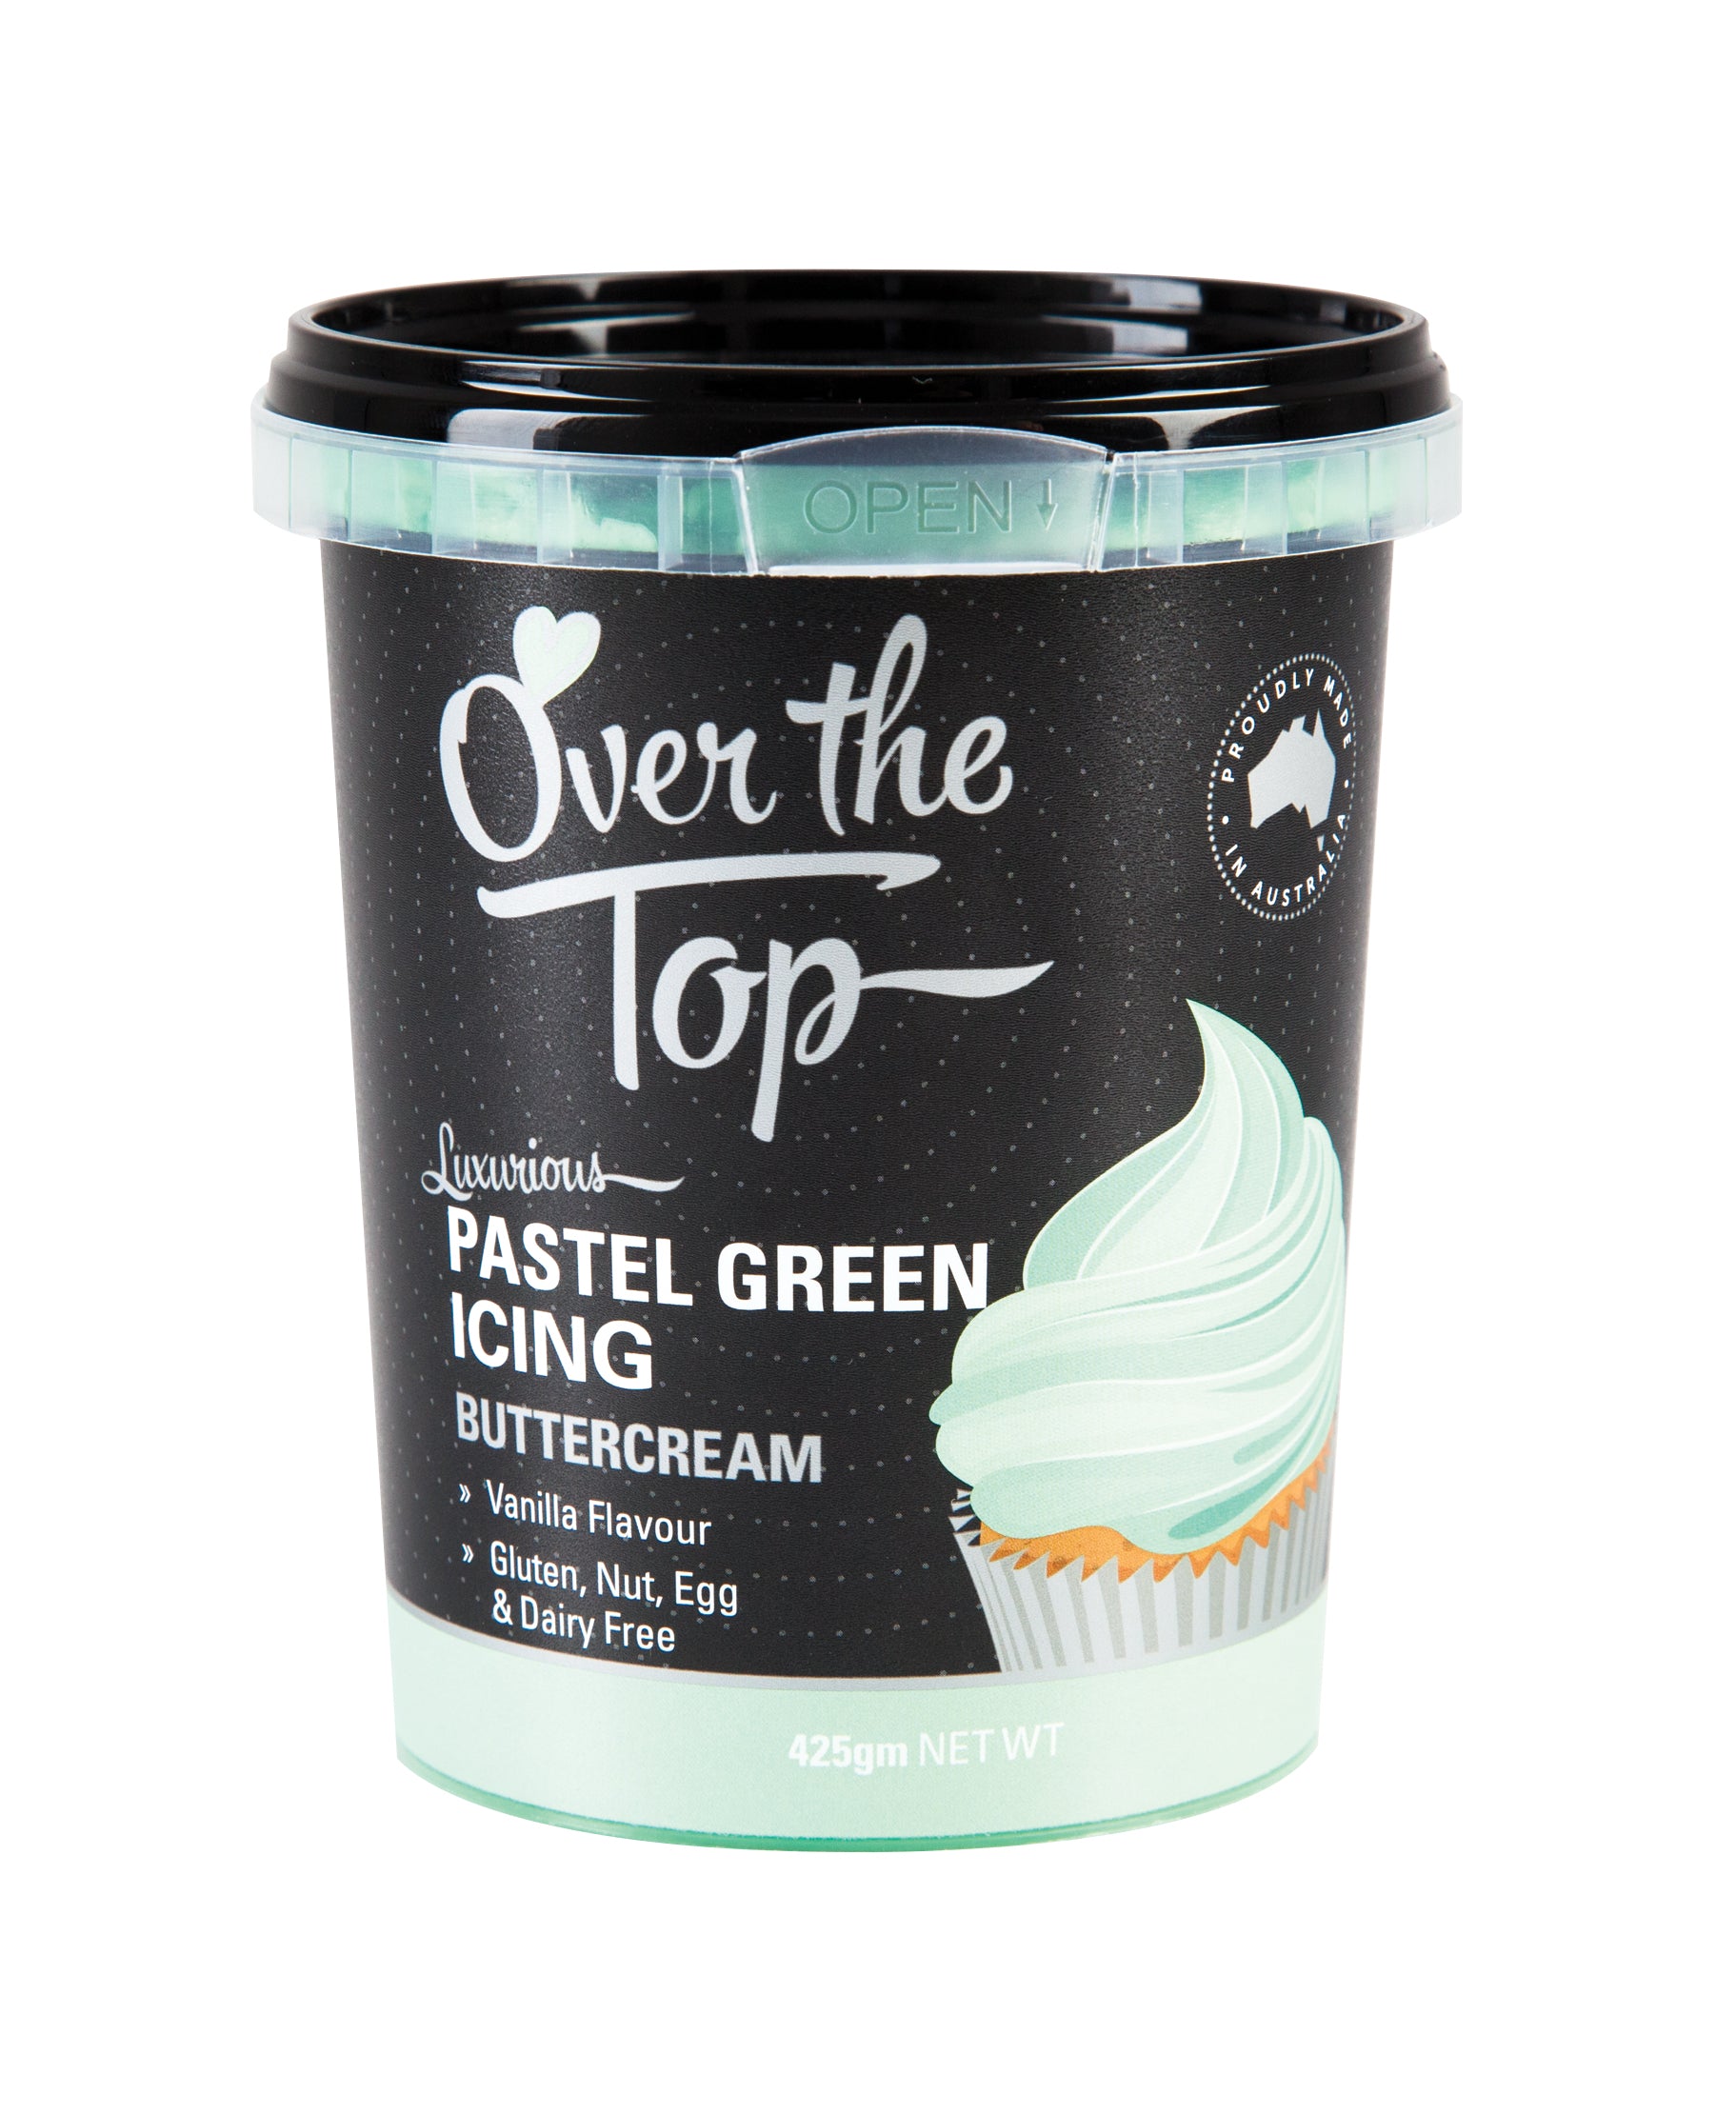 Over the Top - Buttercream Pastel Green 425g